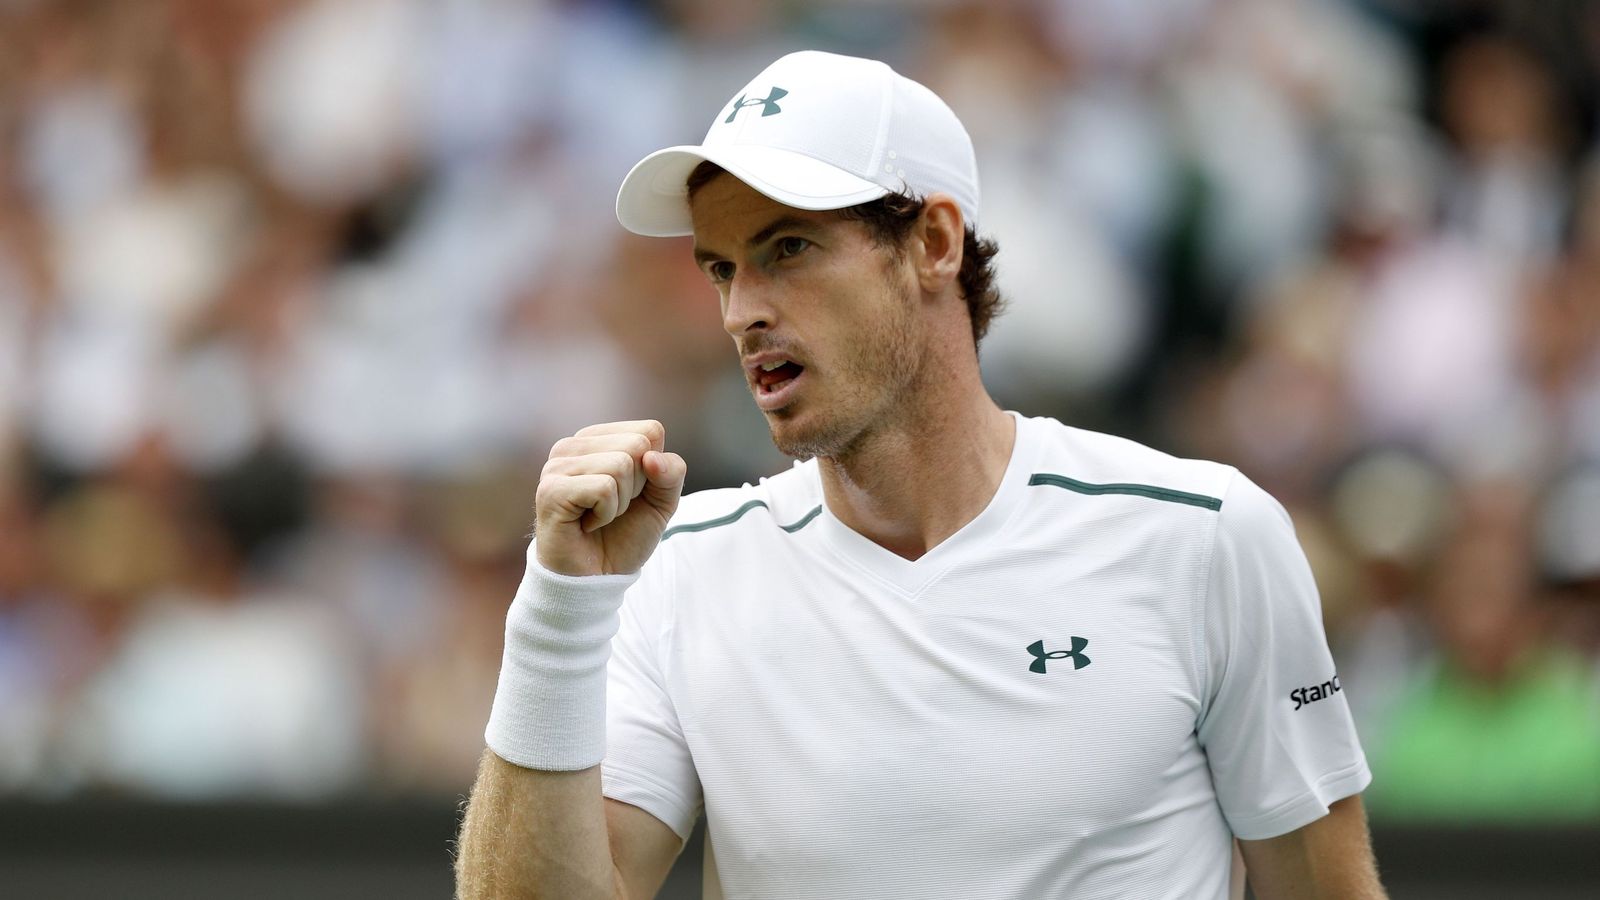 Andy Murray reaches quarterfinals to stay on course for third